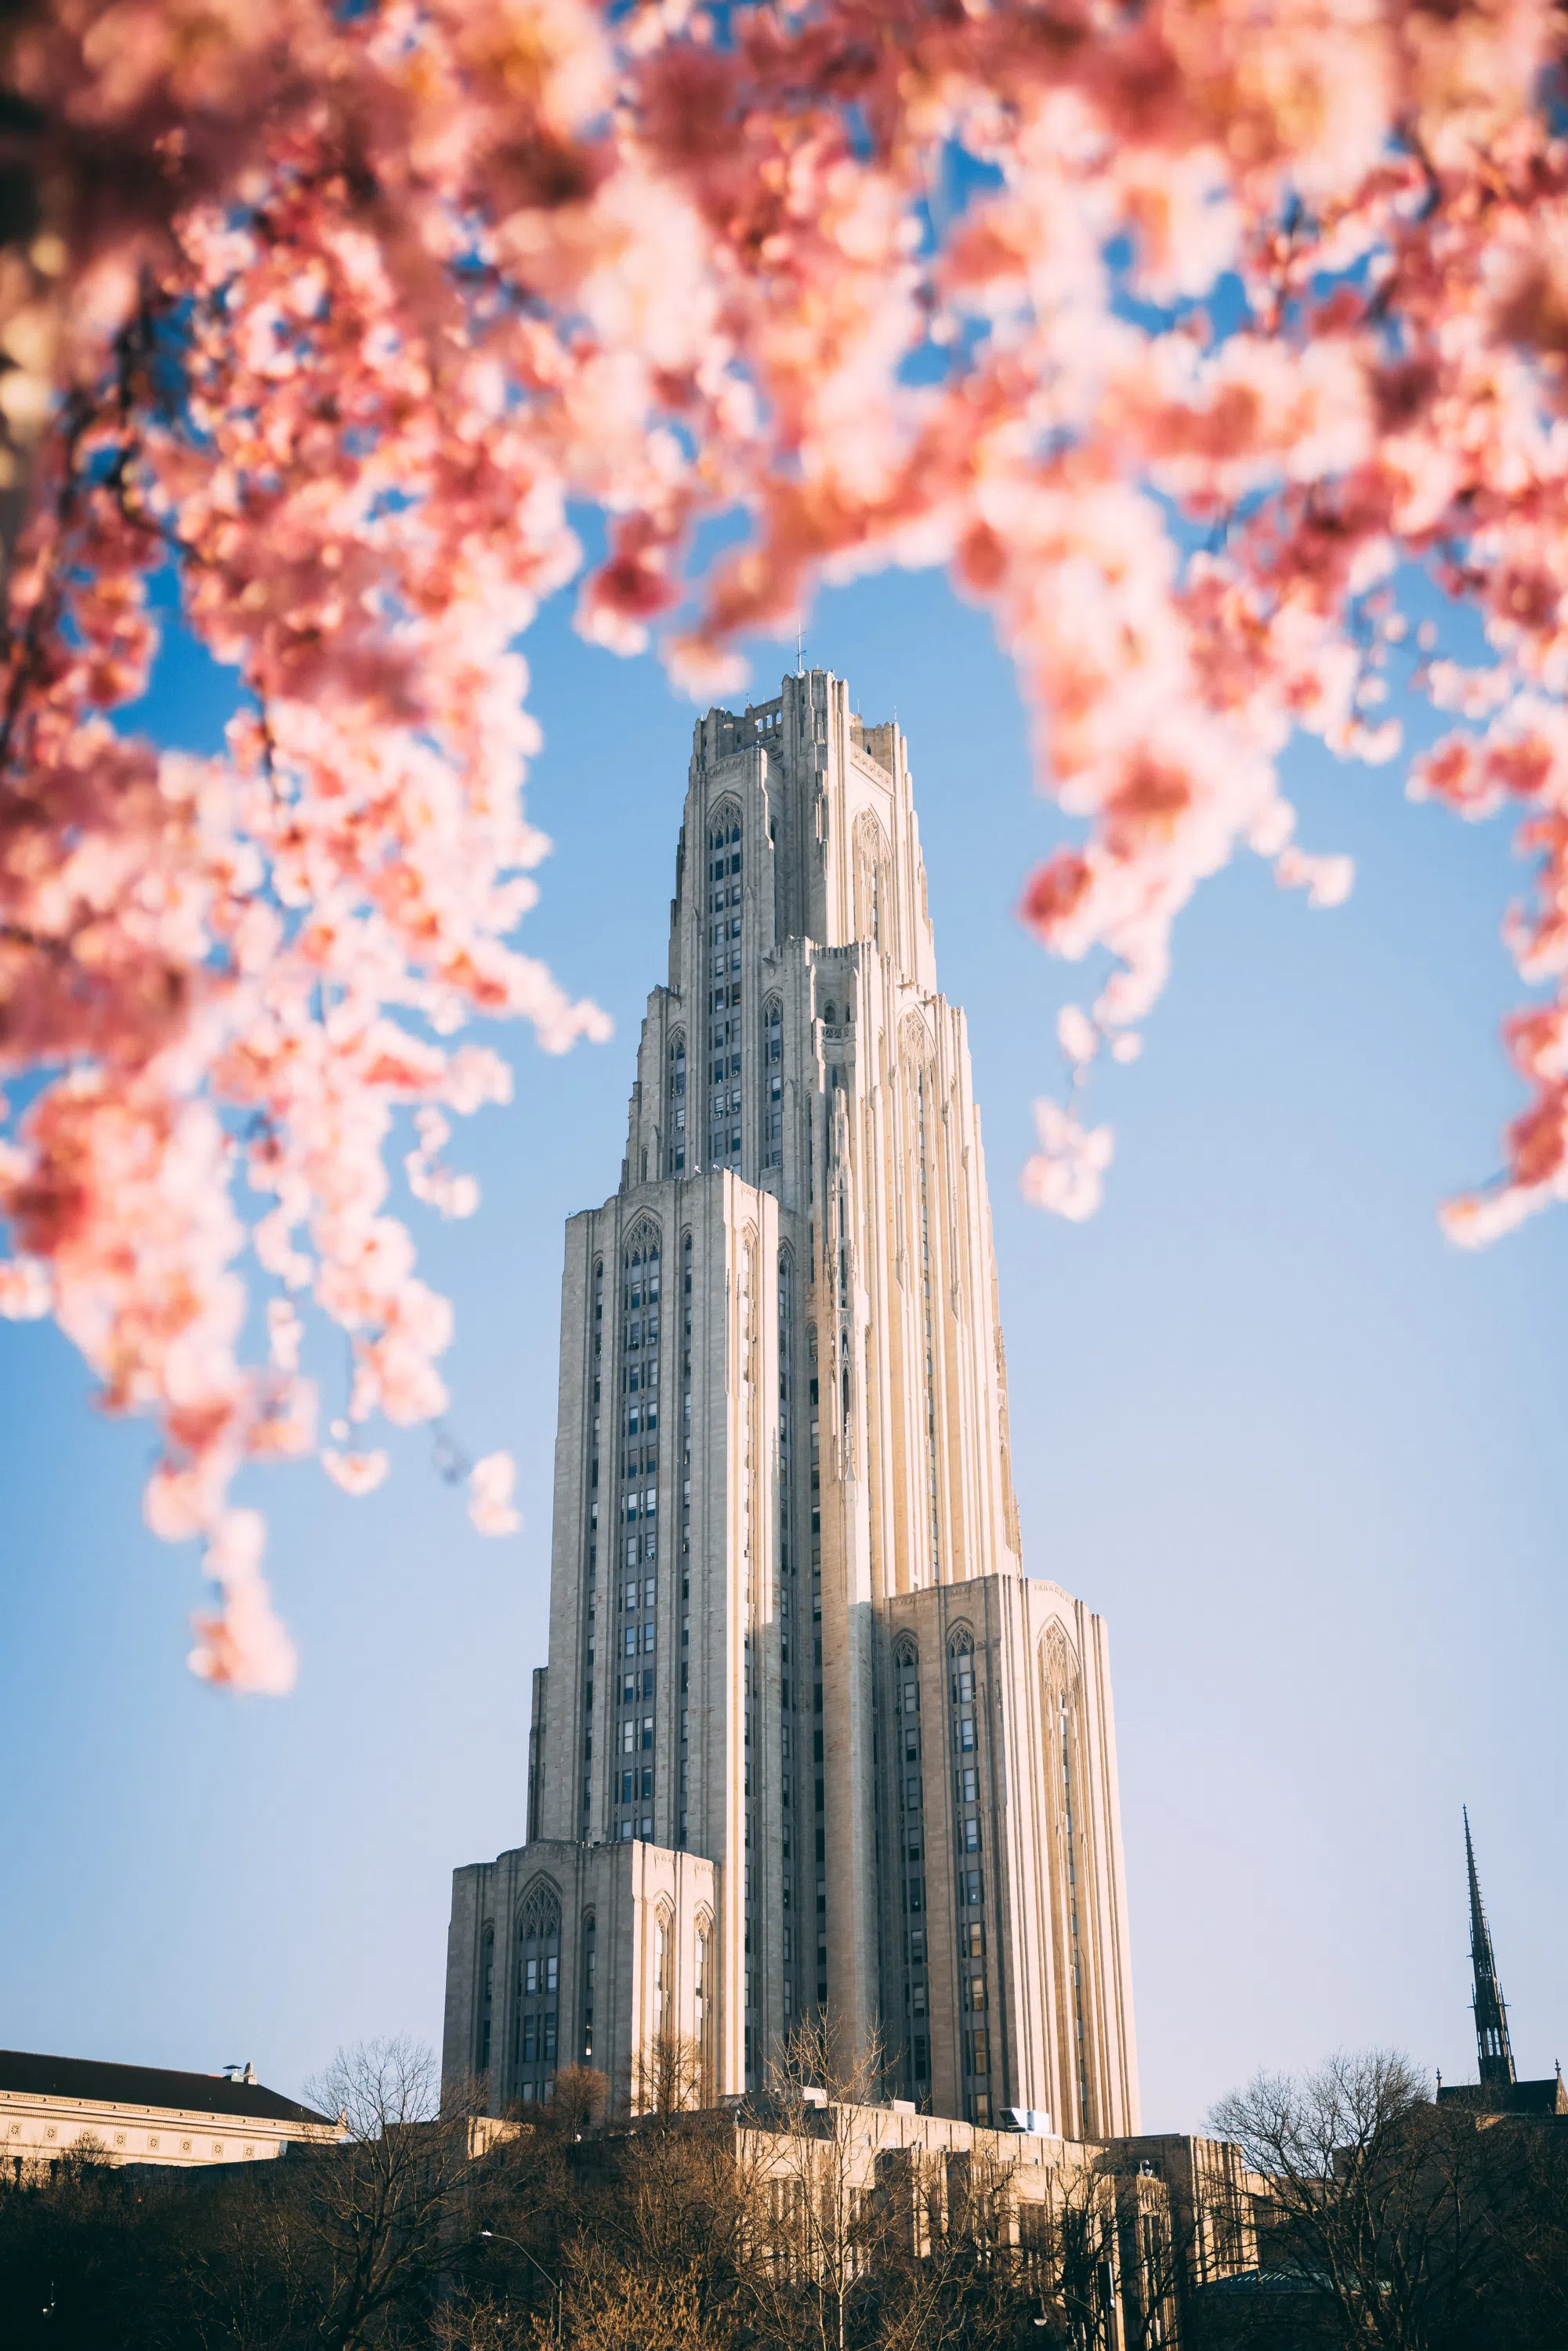 blossoms surround a view of the Cathedral of Learning